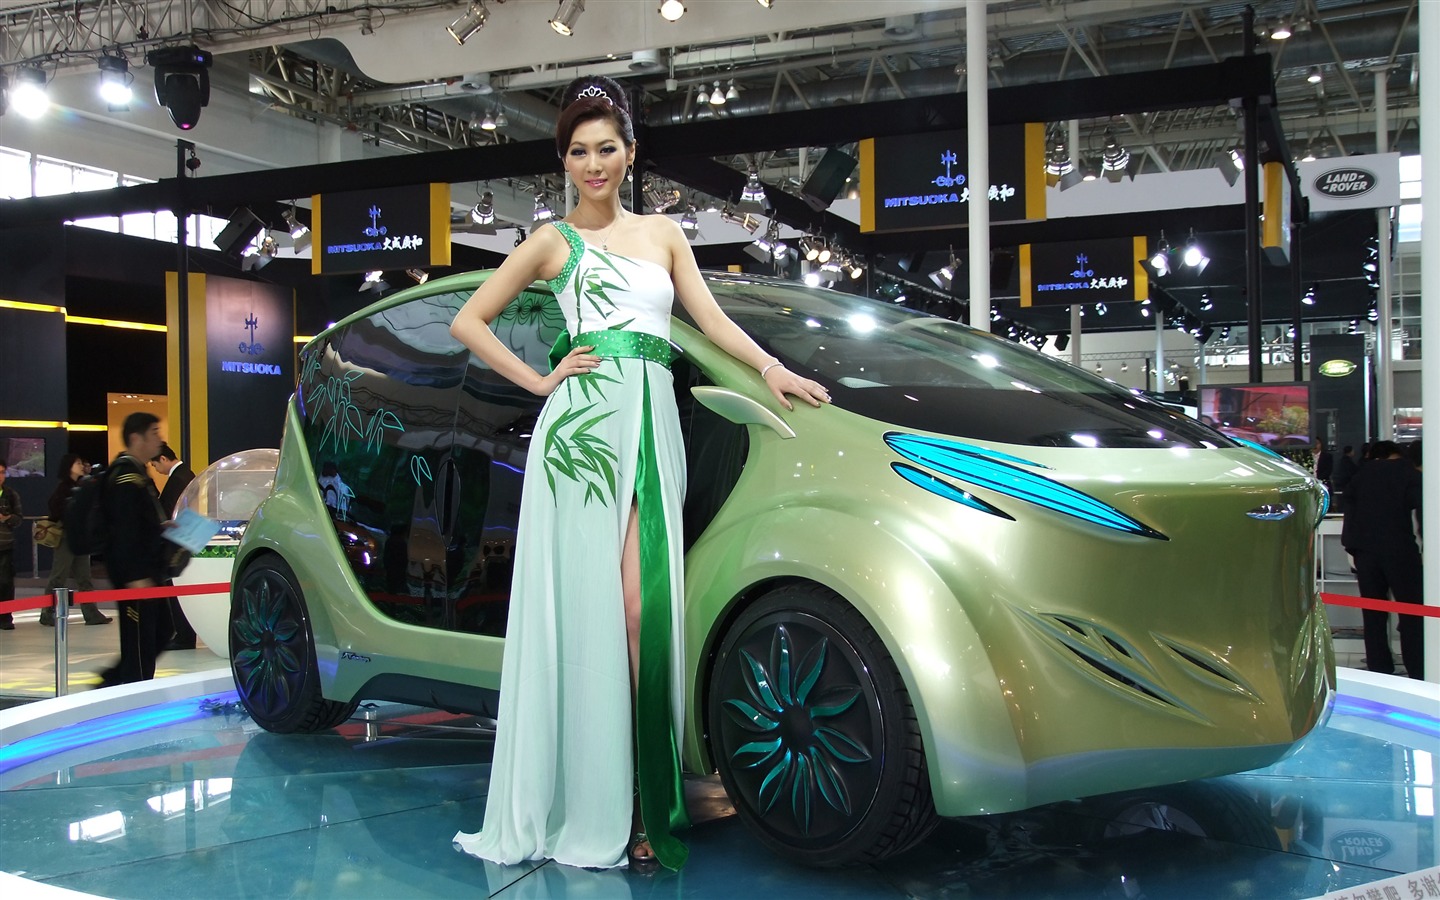 2010 Beijing Auto Show car models Collection (2) #2 - 1440x900